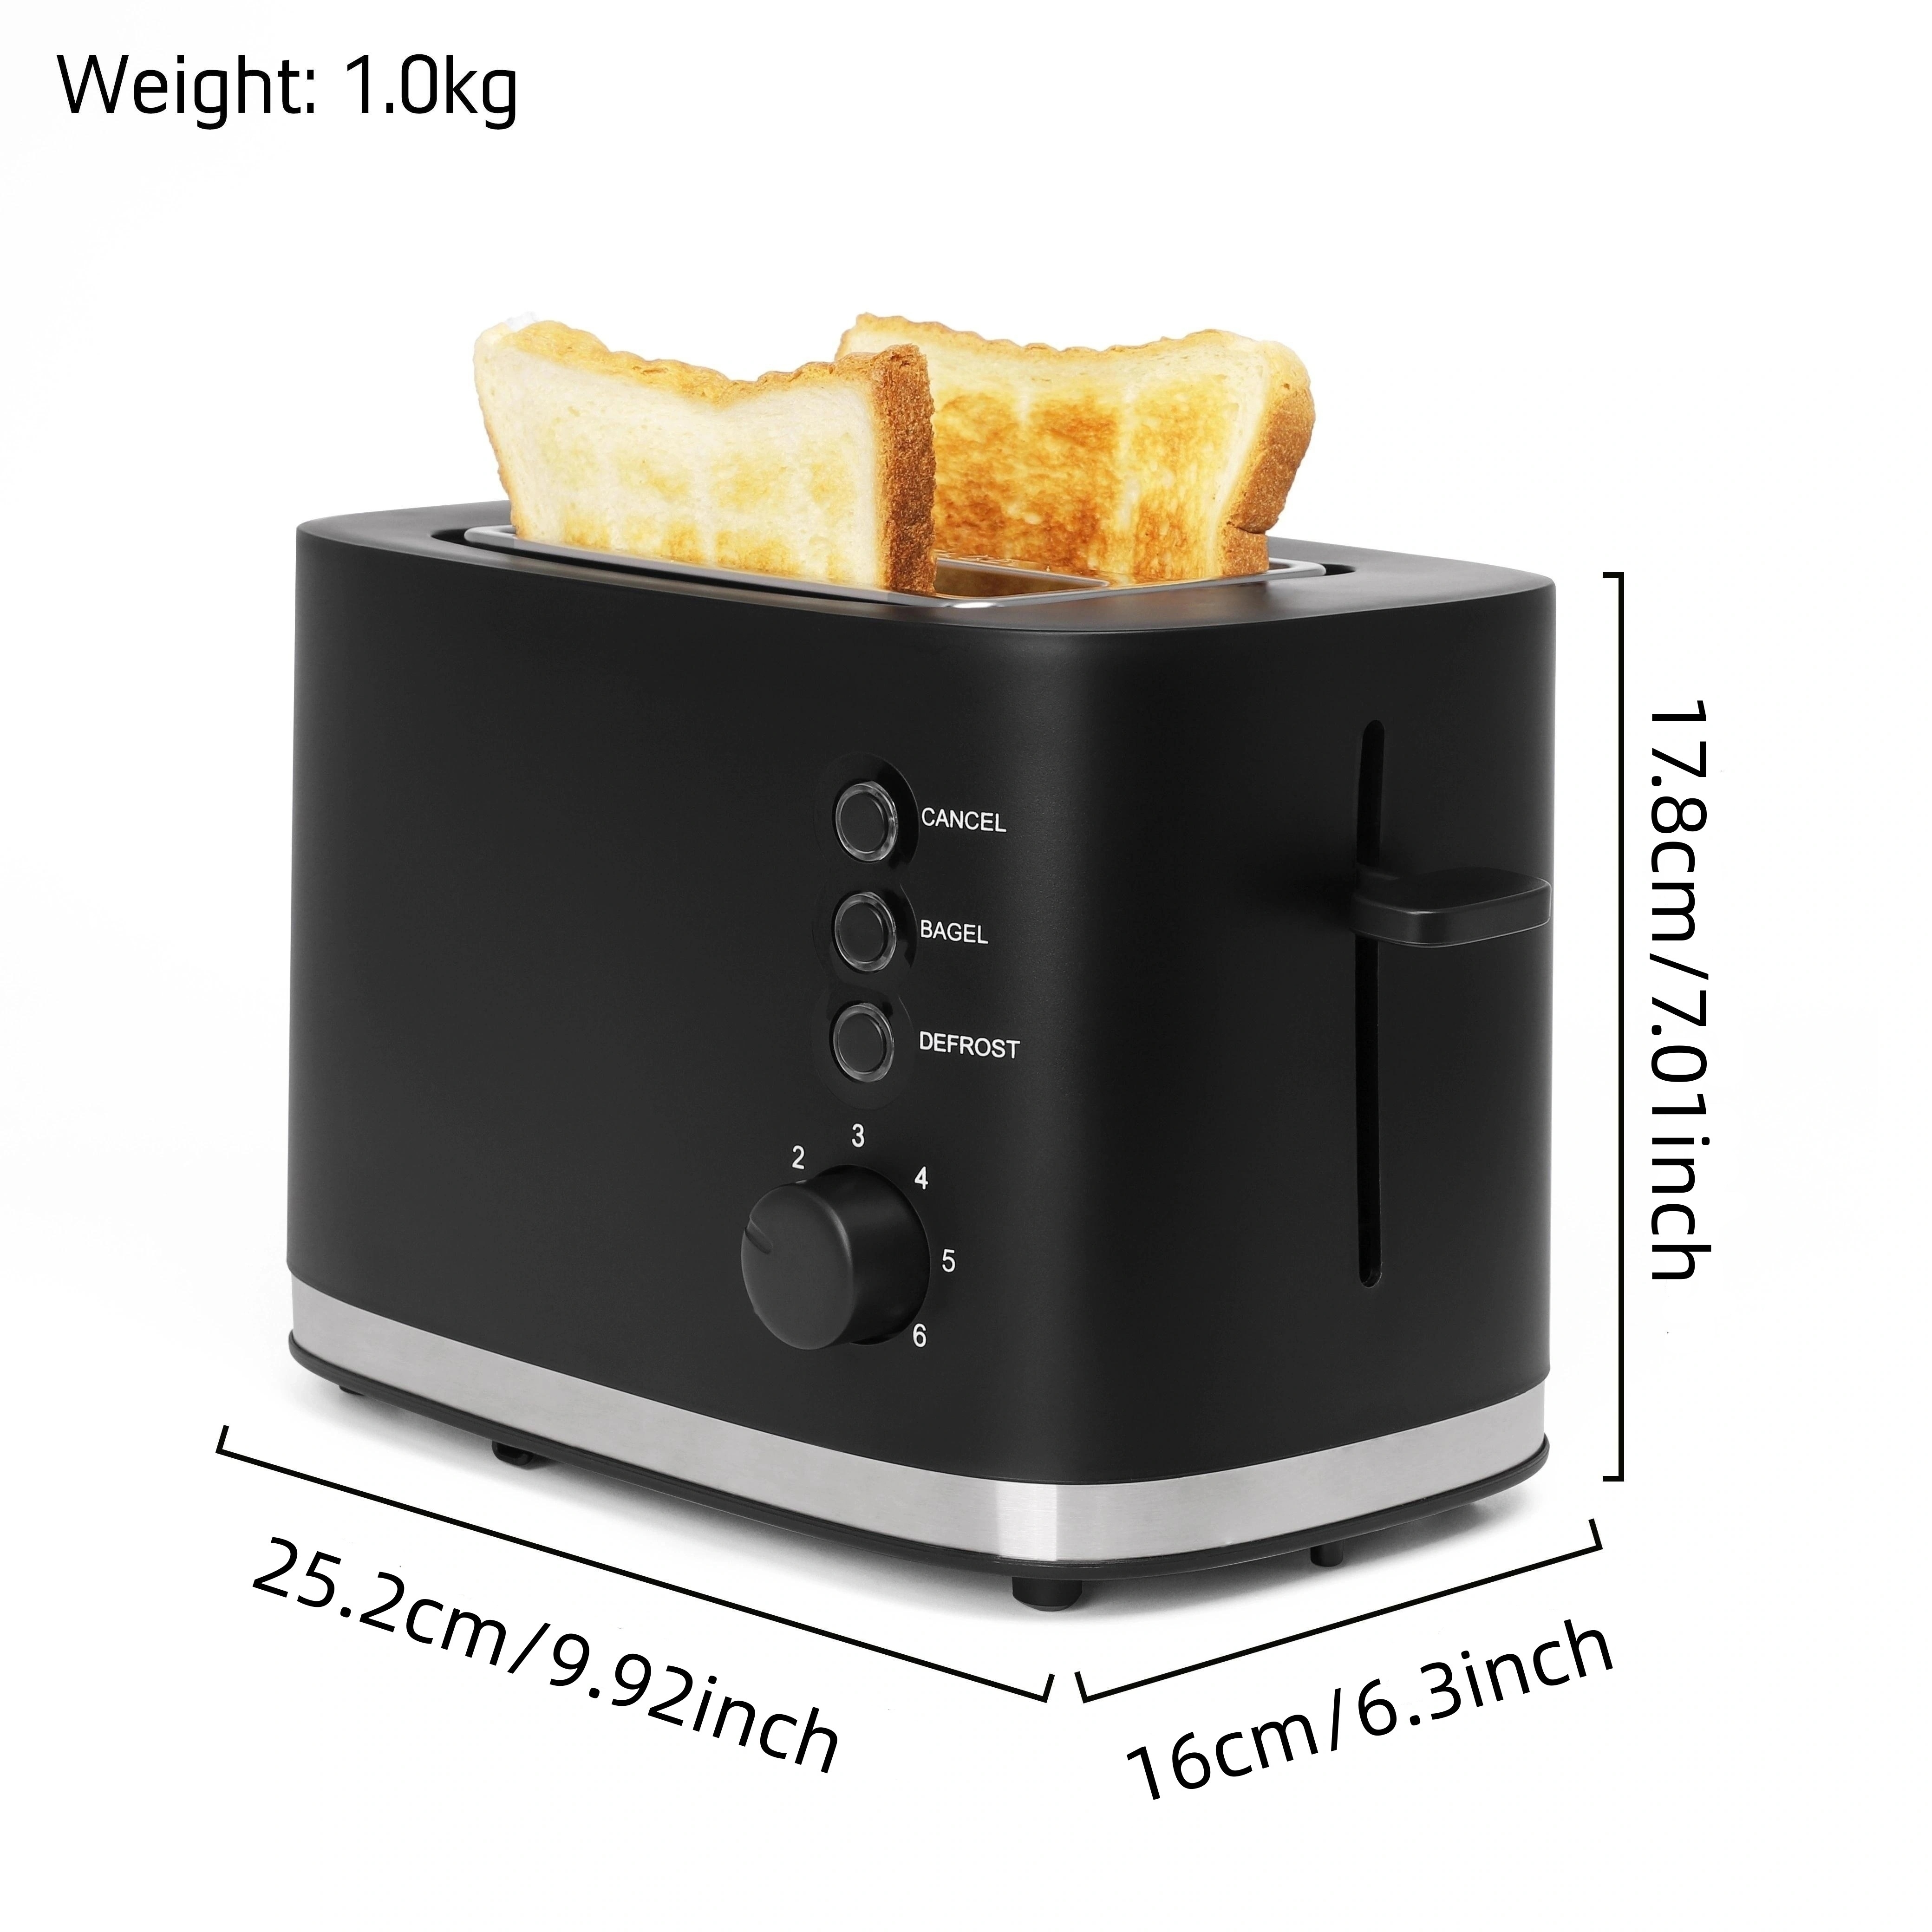 Ovente Compact 2 Slice Toaster with Extra-Wide Slots for Bagel, 6-Setting  Knobs, Defrost Function, Cancel, Stainless Steel Body, Turquoise (TS2450T)